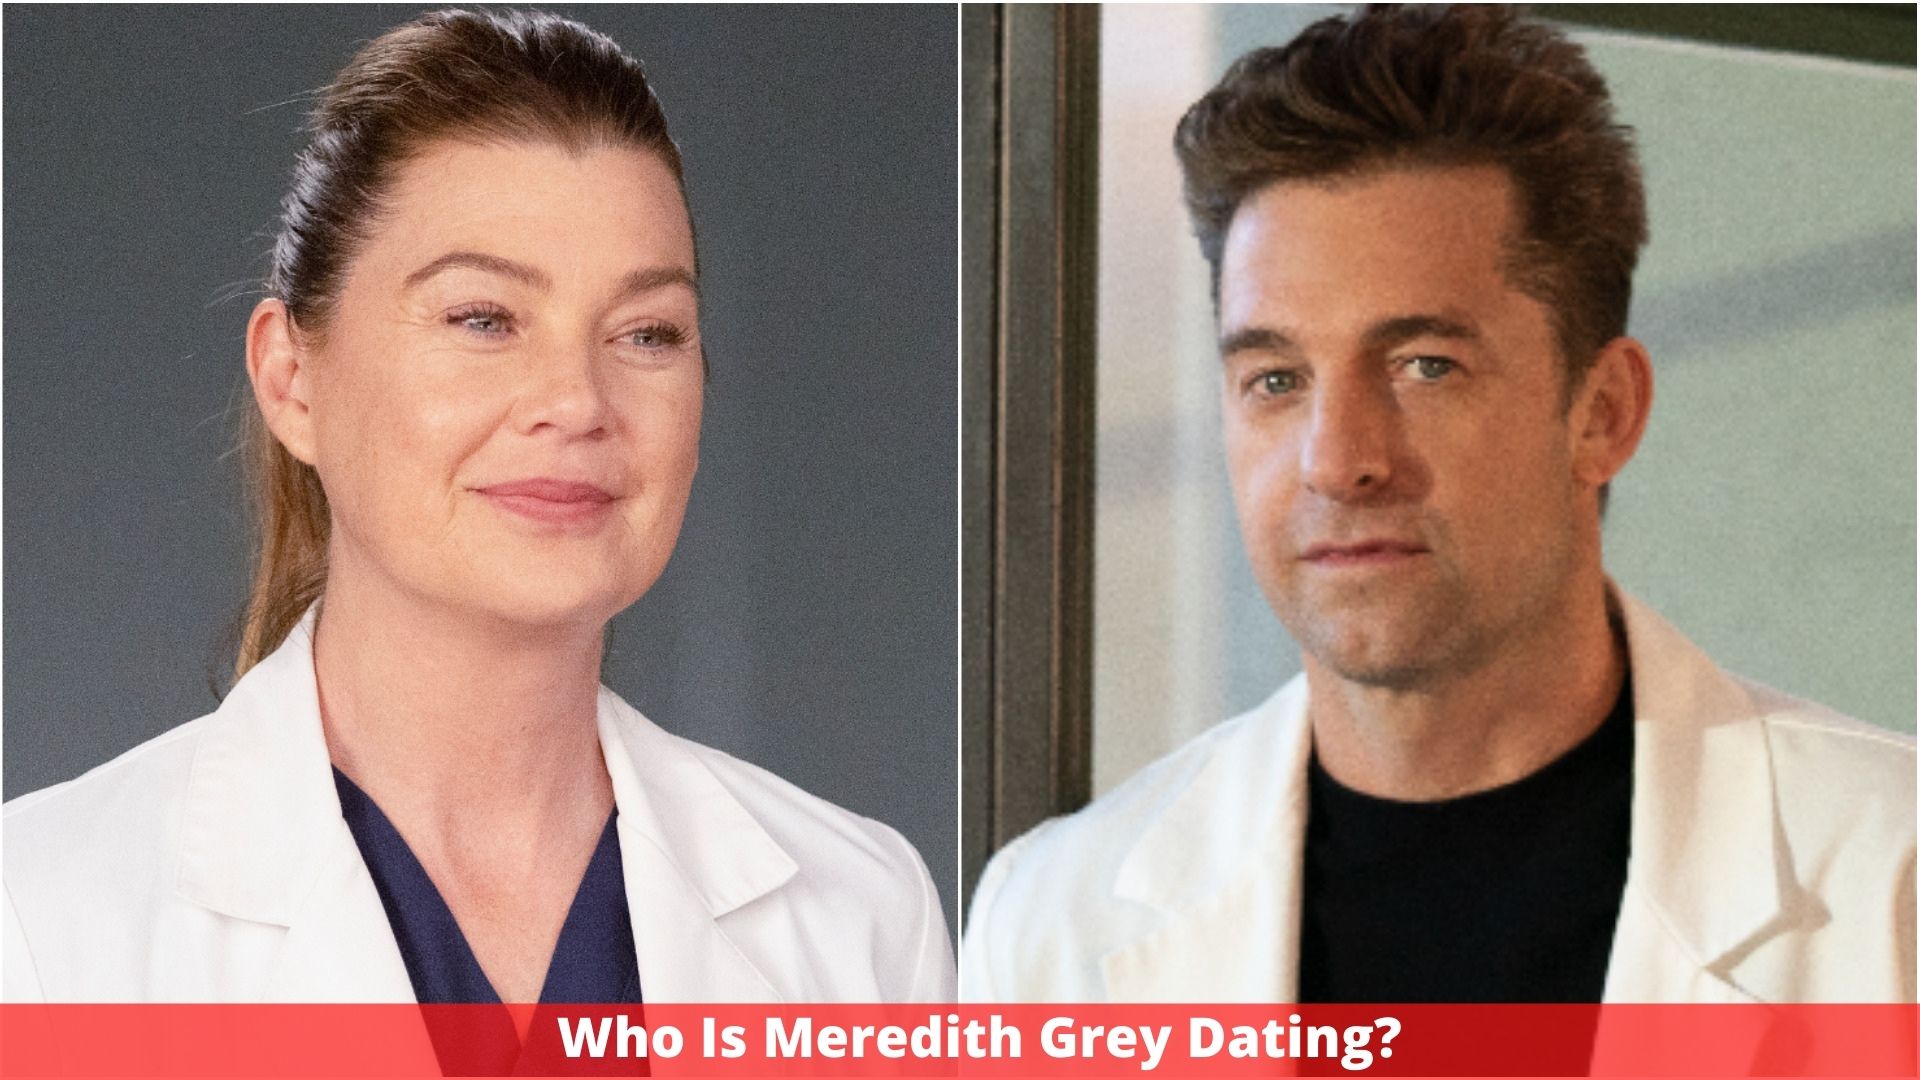 Who Is Meredith Grey Dating?